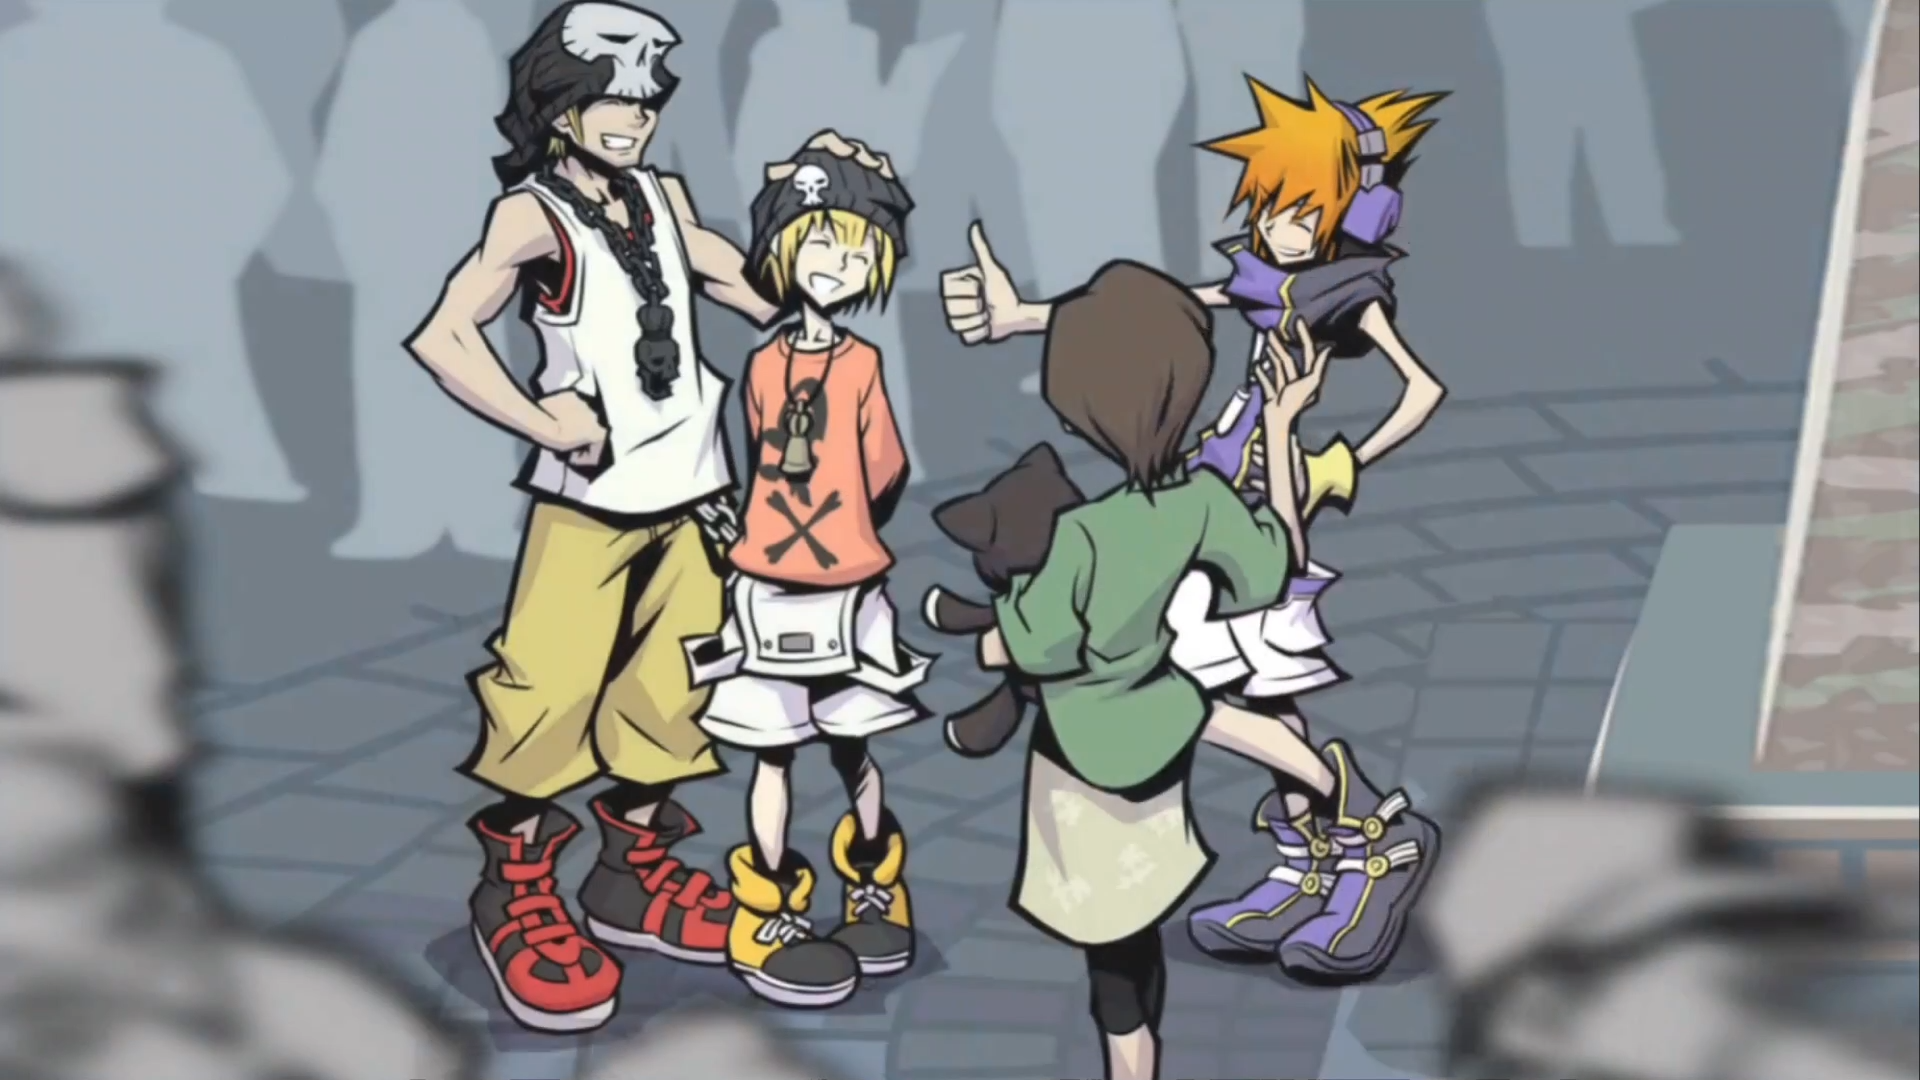 Images about TWEWY.